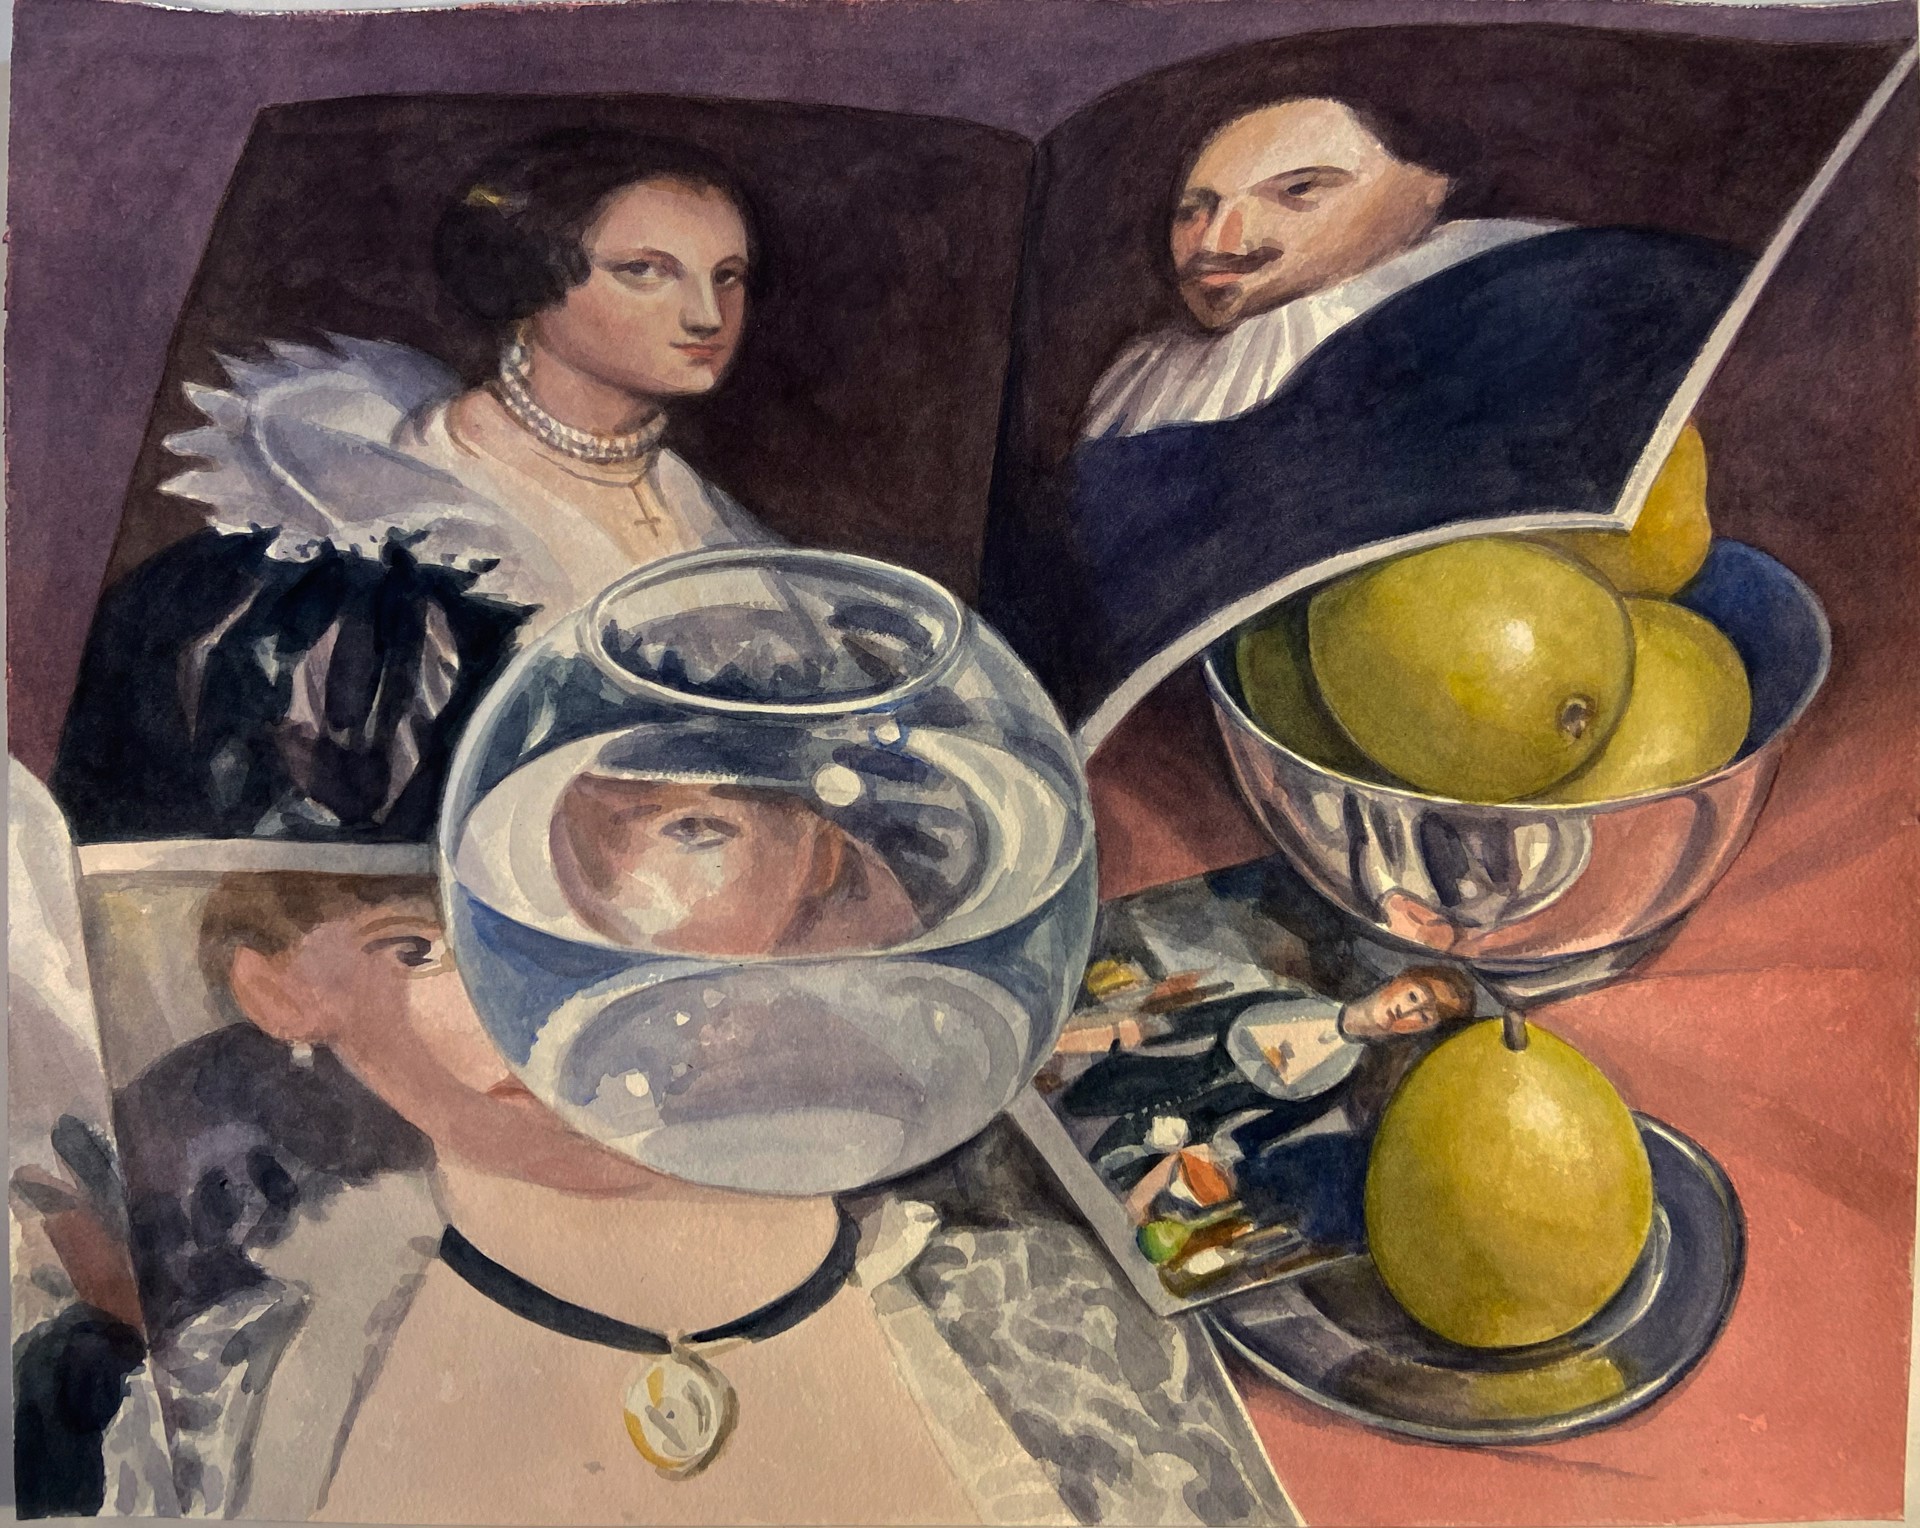 Fish Bowl at the Folies Bergere by Tim Schiffer